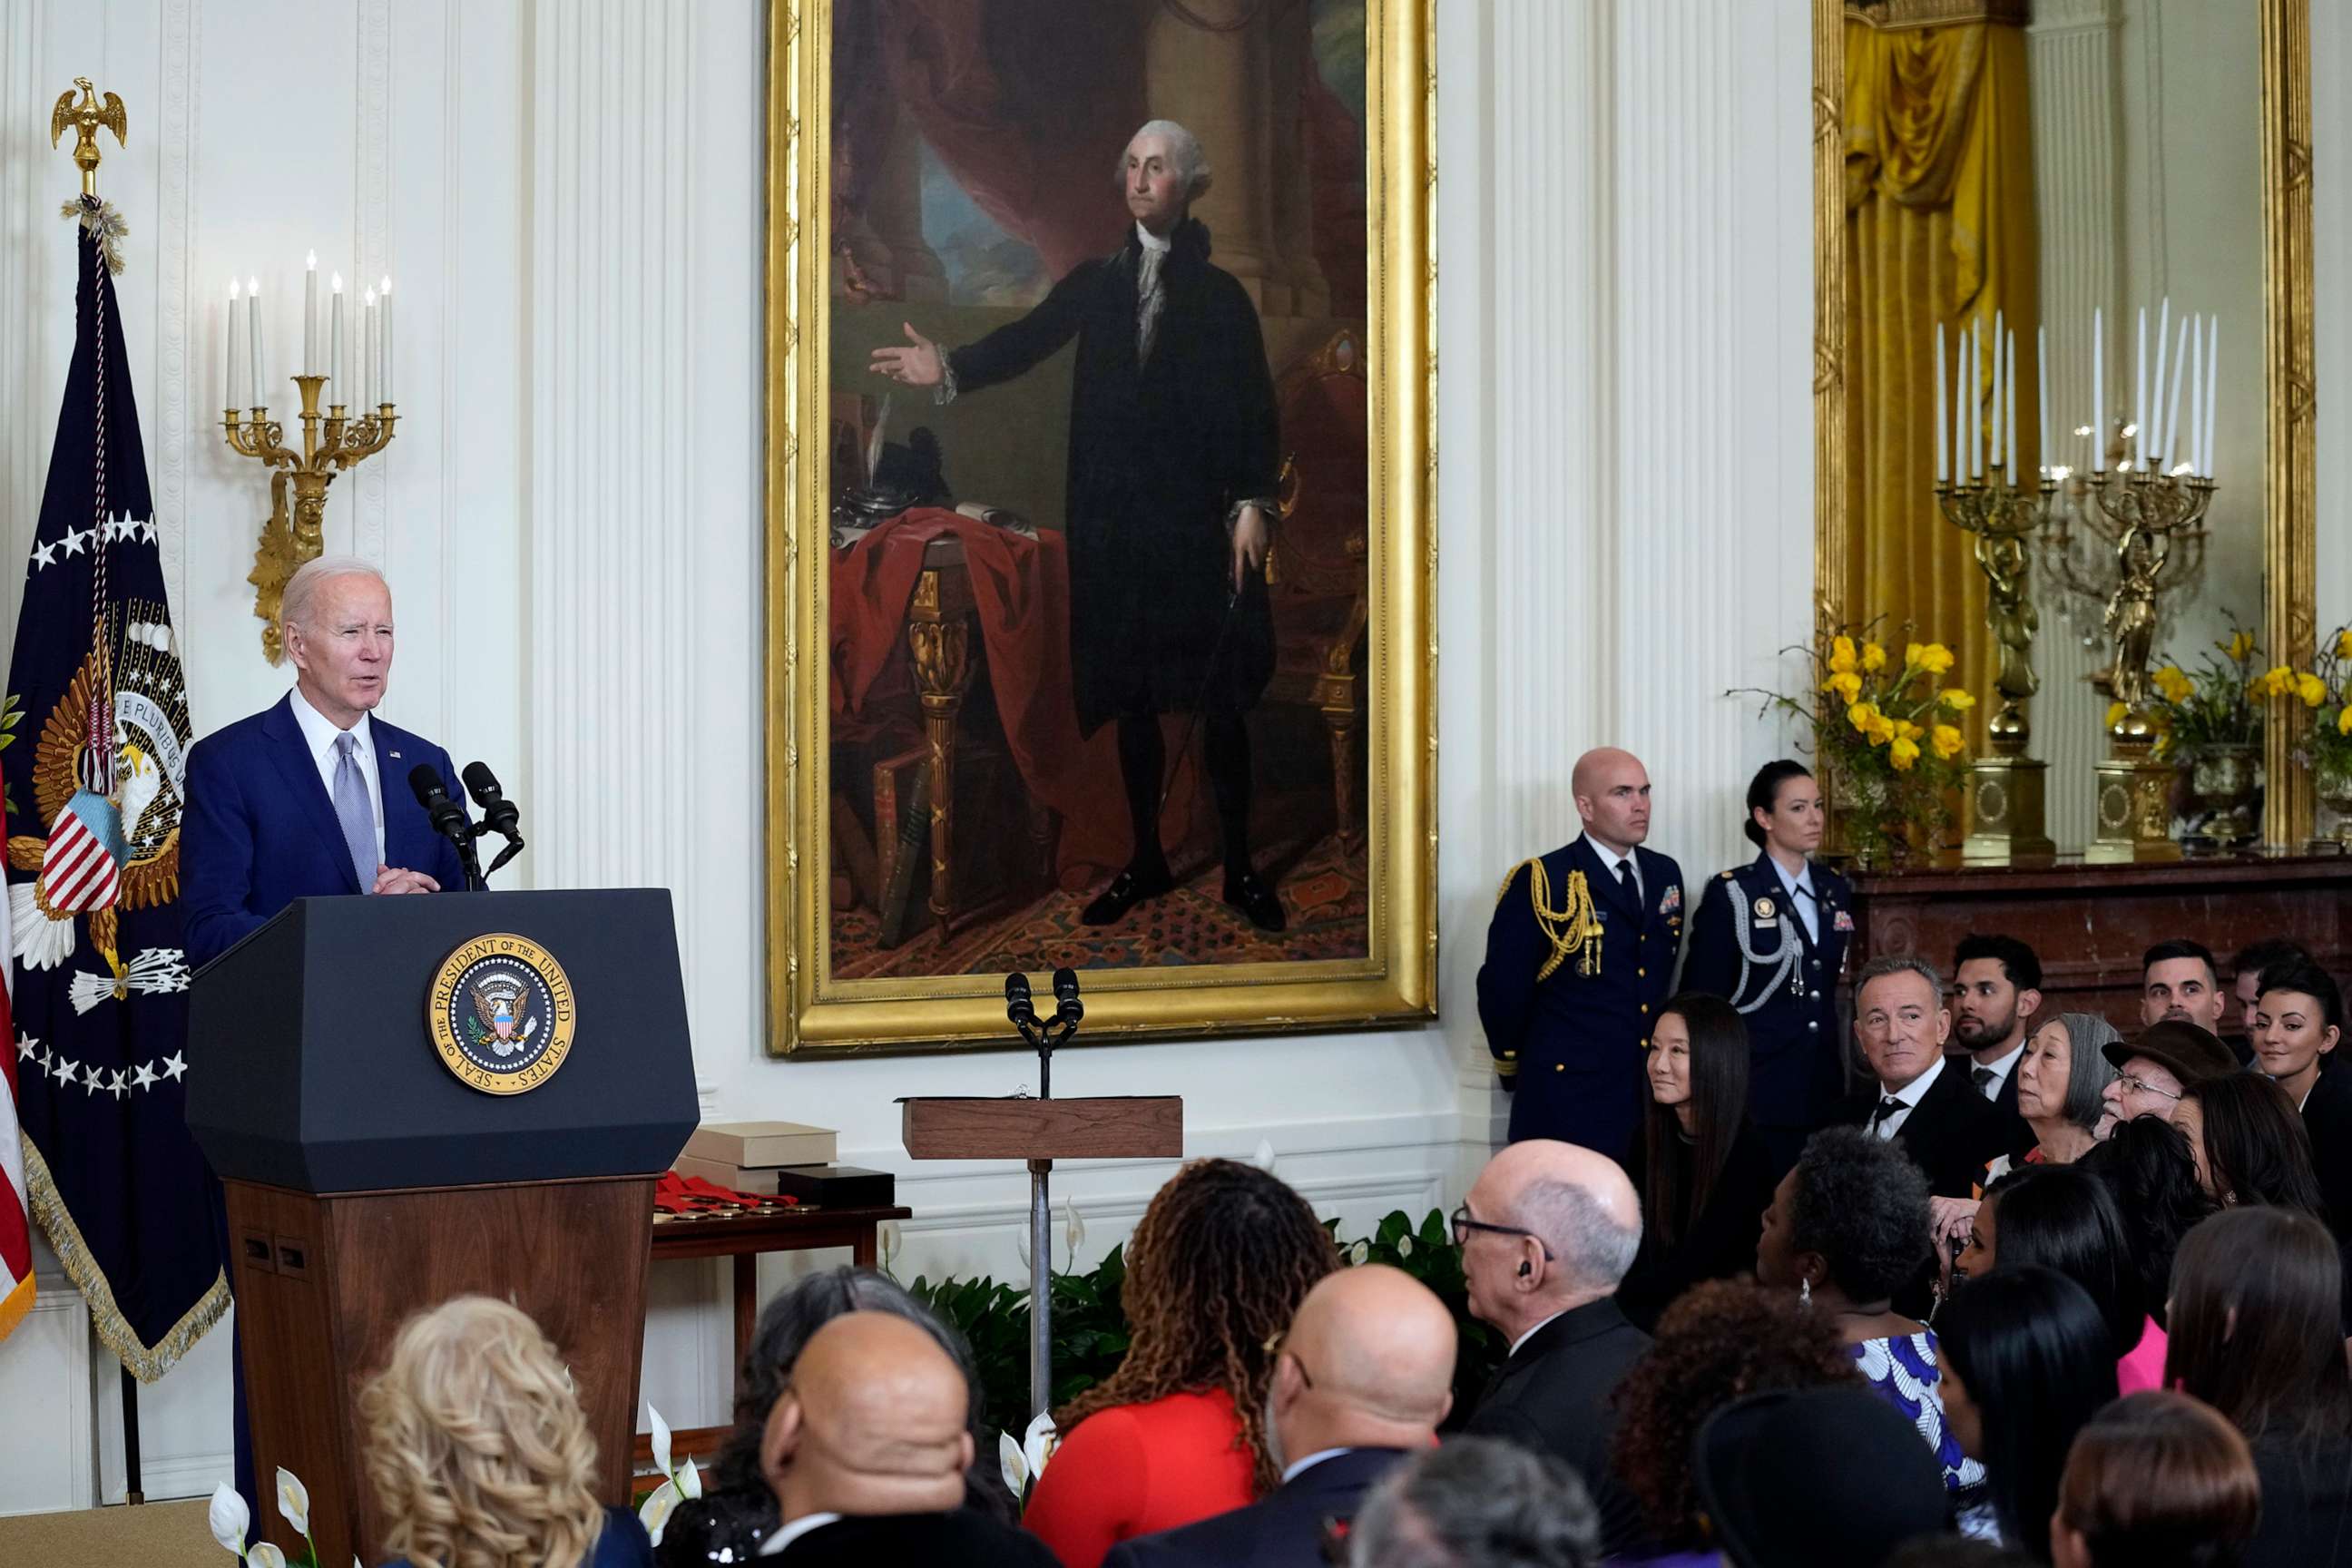 PHOTO: President Joe Biden speaks before presenting the 2021 National Humanities Medal and the 2021 National Medal of Arts at White House in Washington, D.C., March 21, 2023.